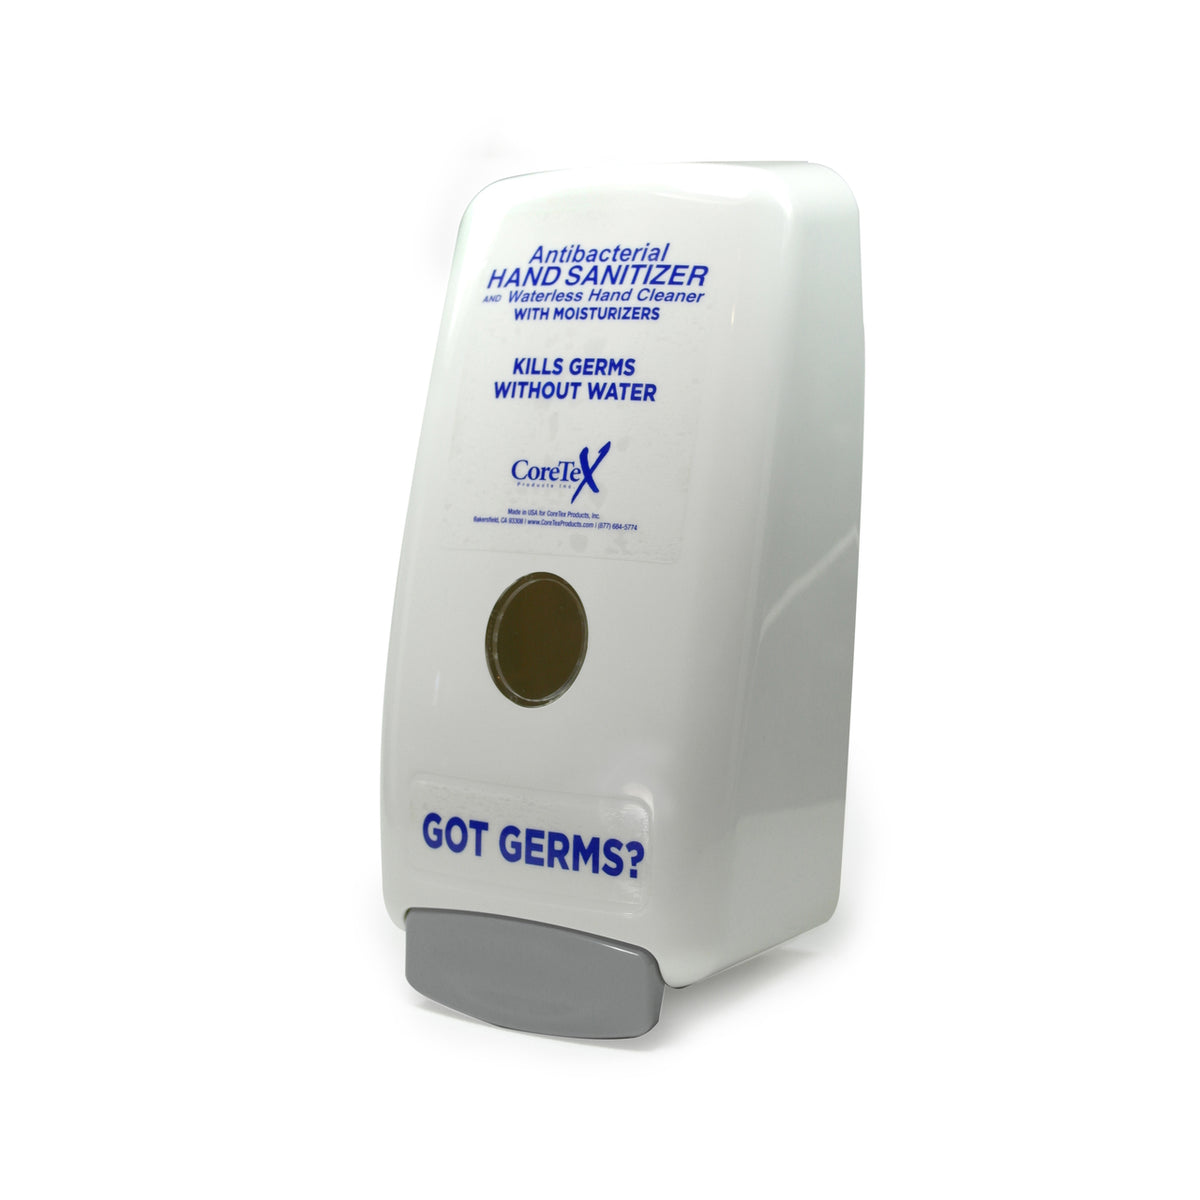 Hand Sanitizer Dispenser for Schools, Hospitals, Hotels and Stores